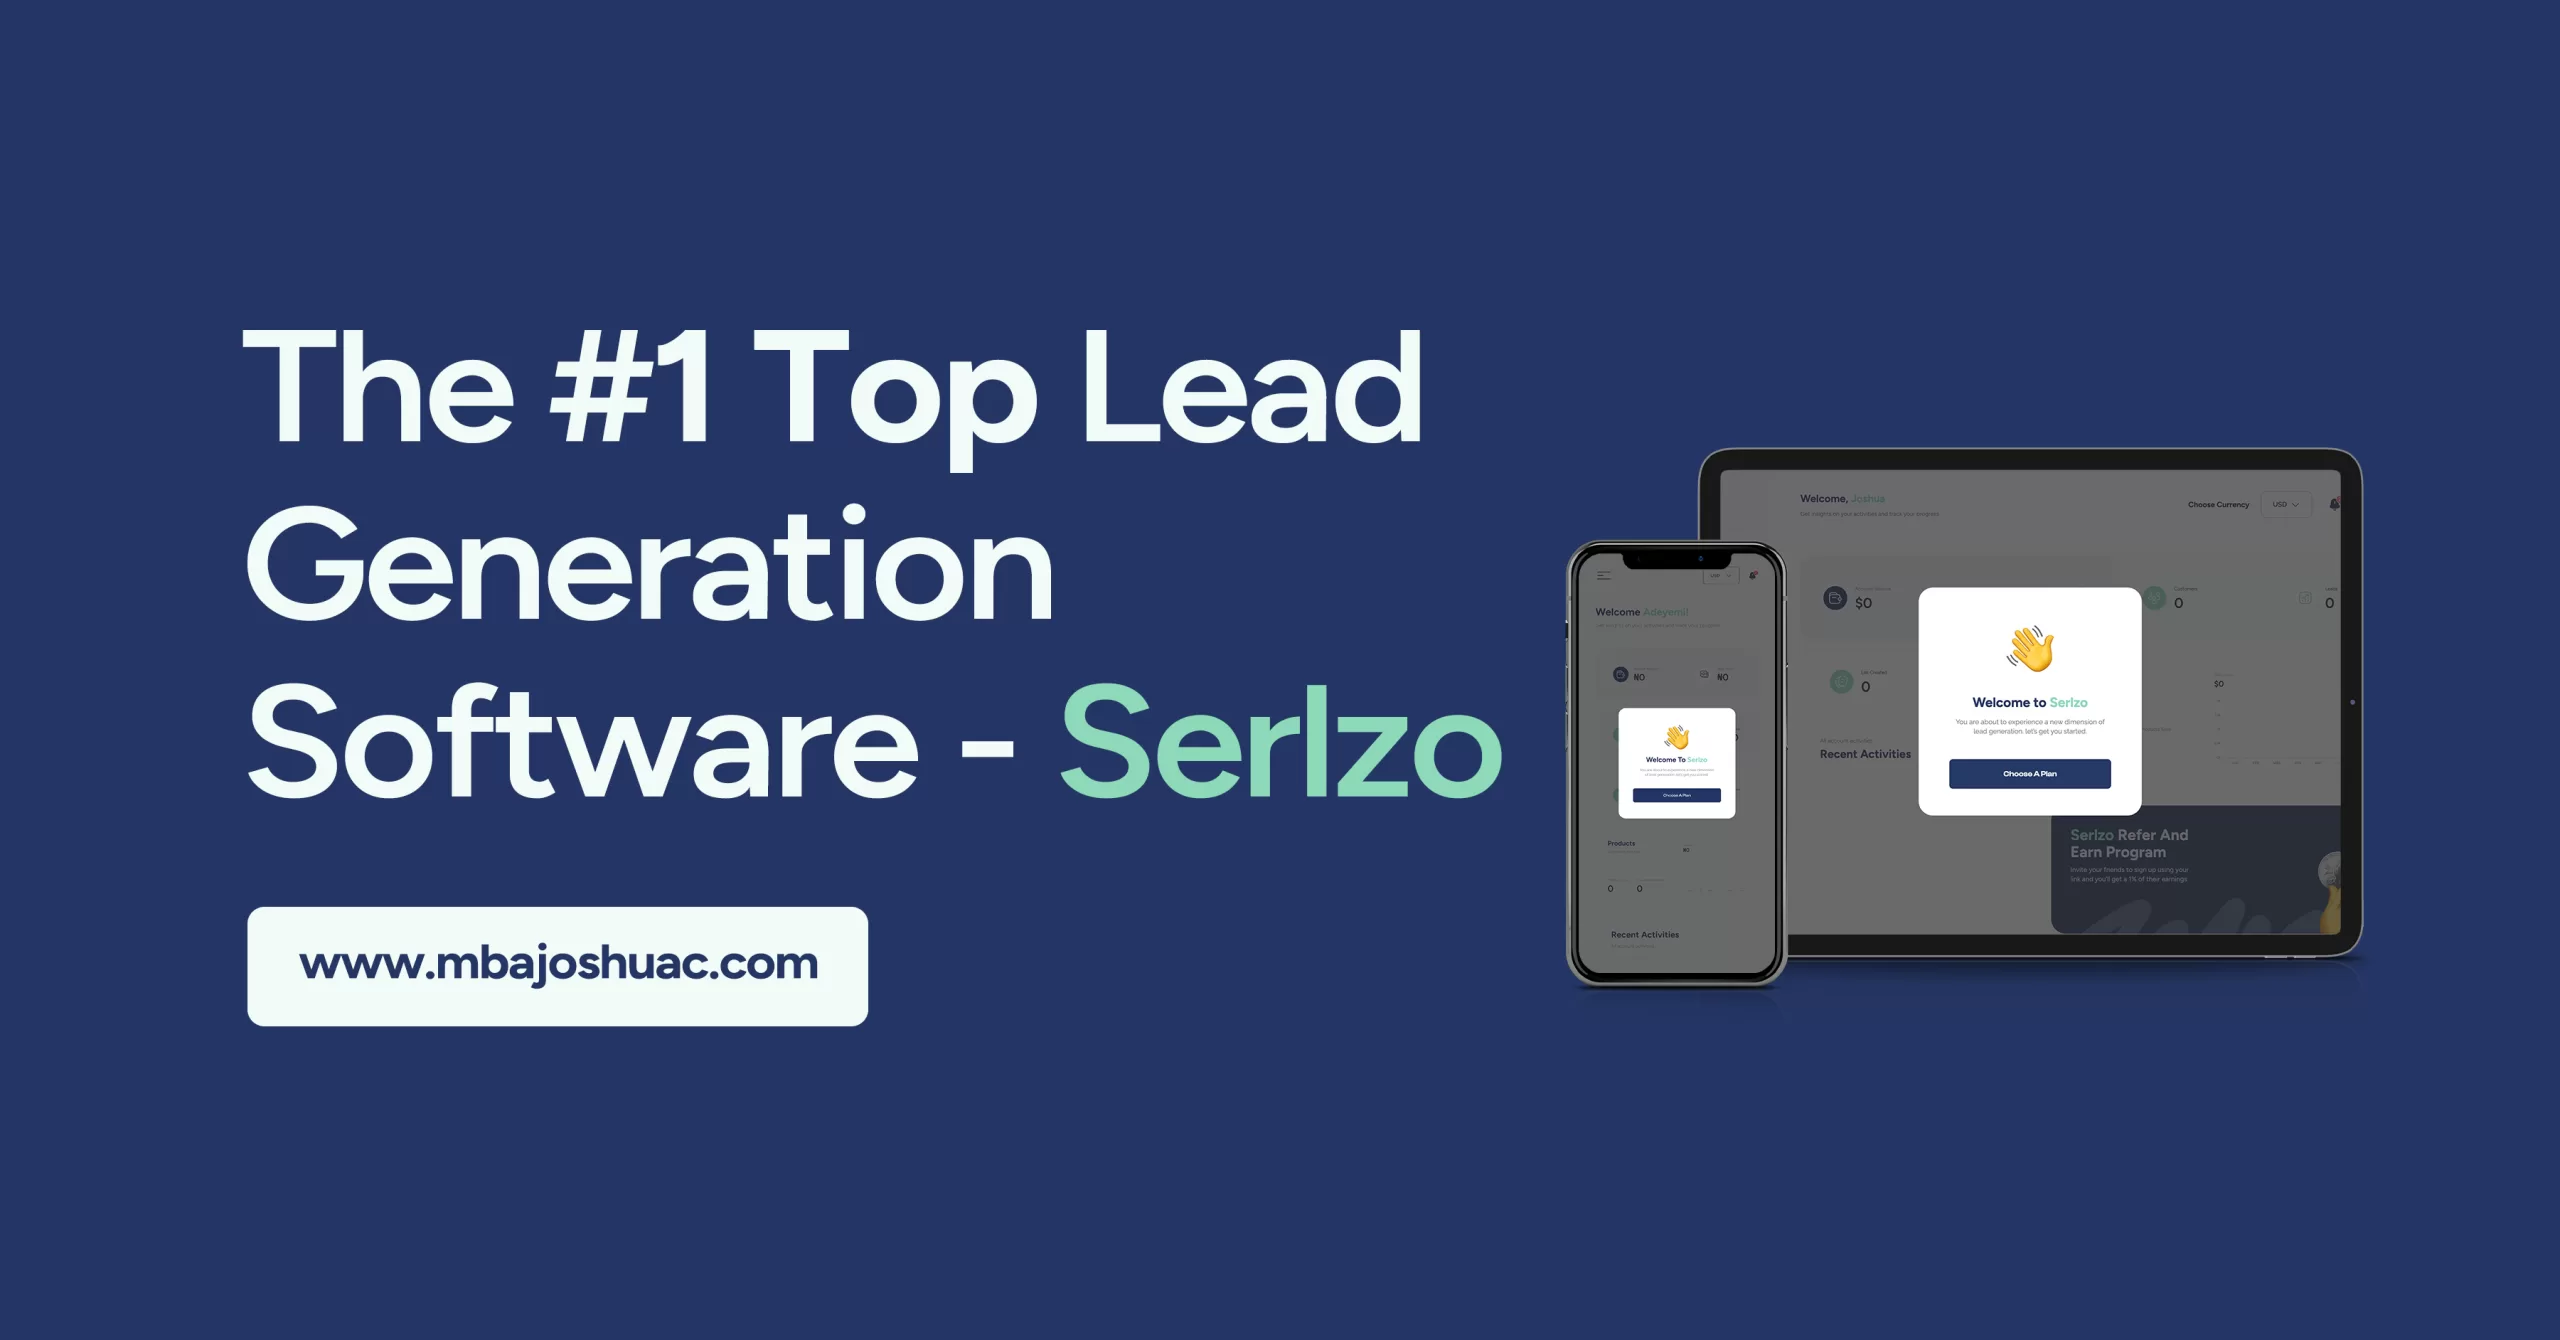 The #1 Top Lead Generation Software – Serlzo